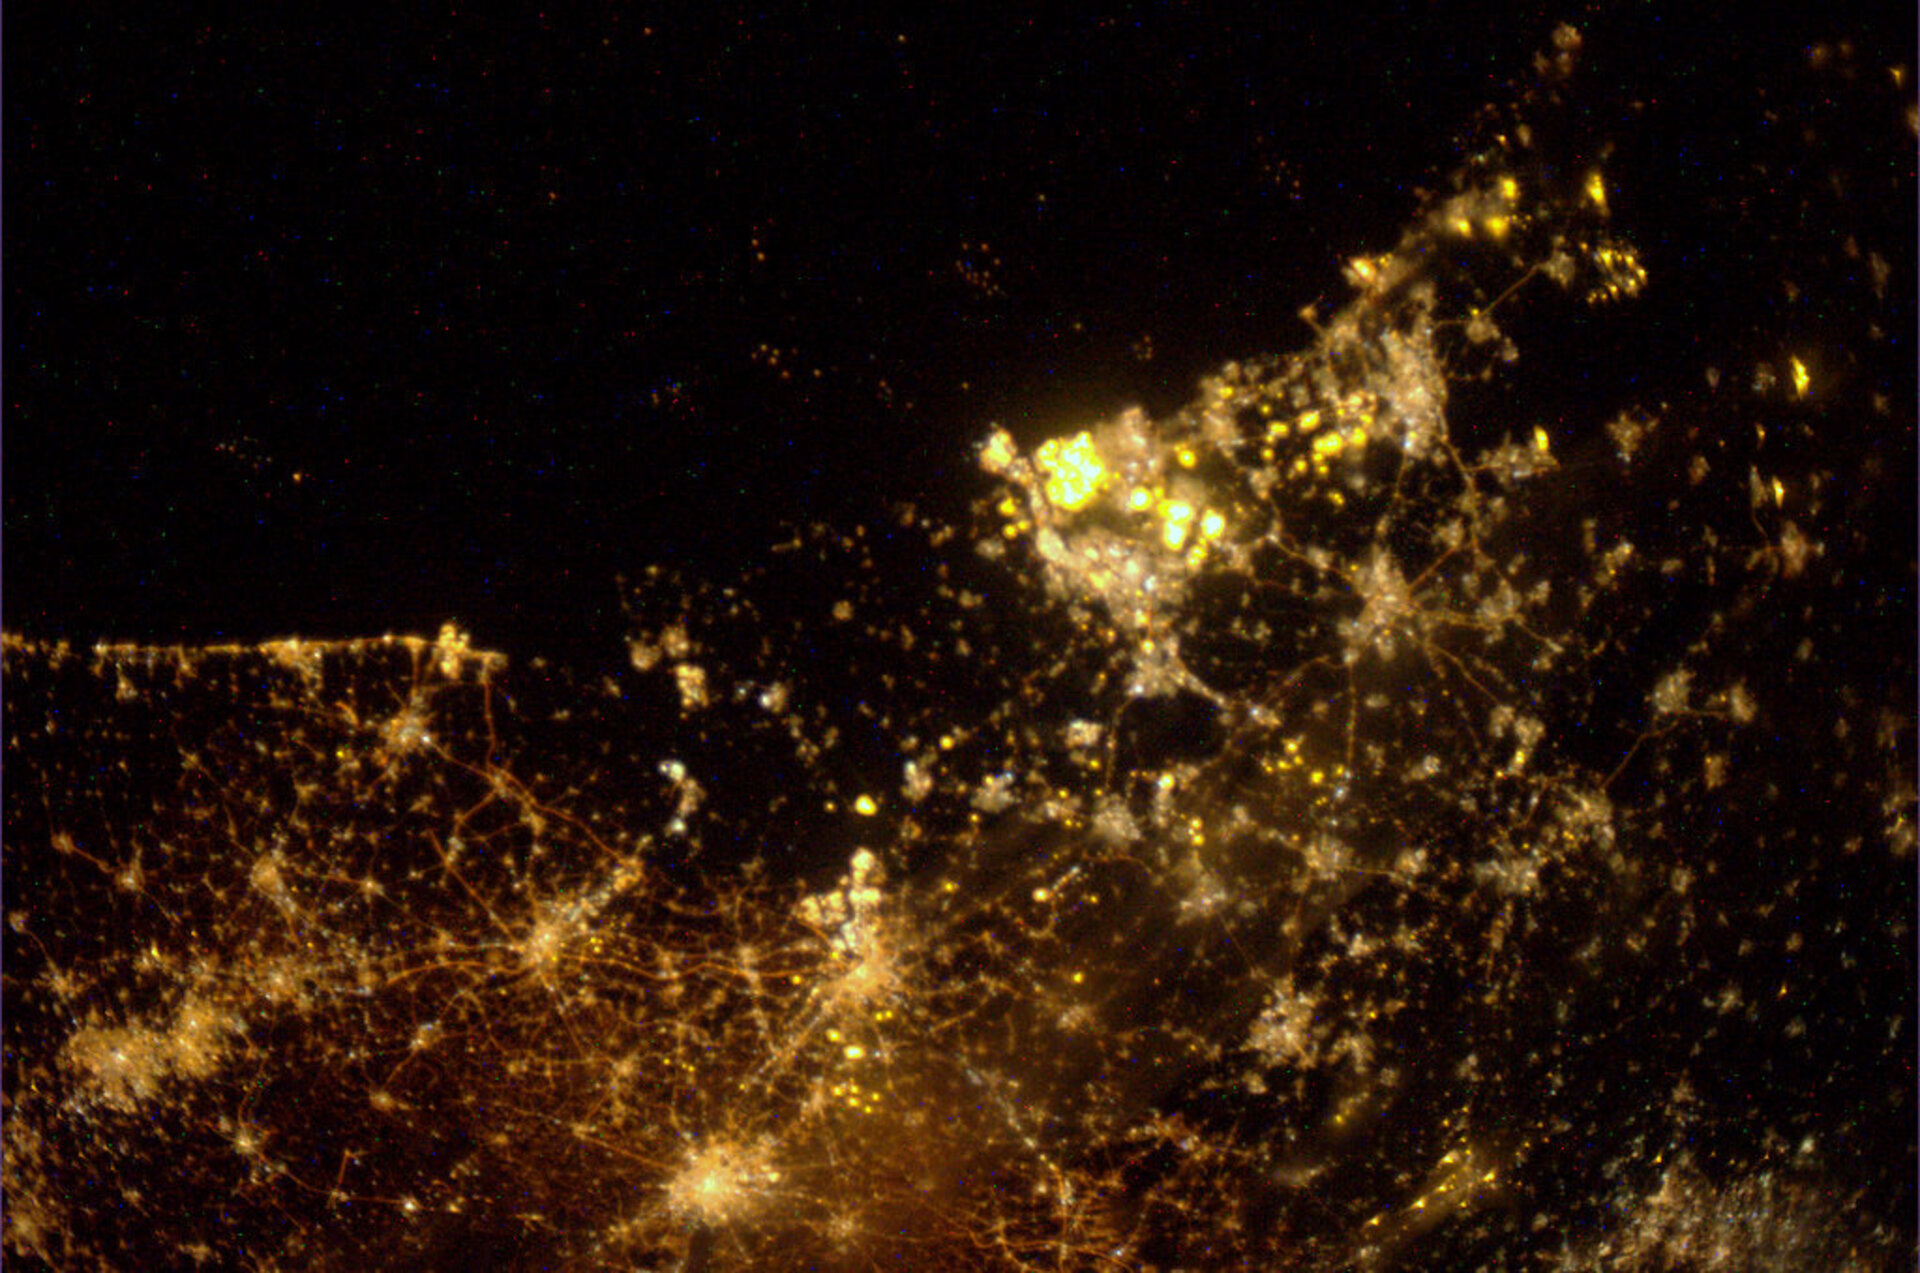 Holland by night, as seen from the ISS